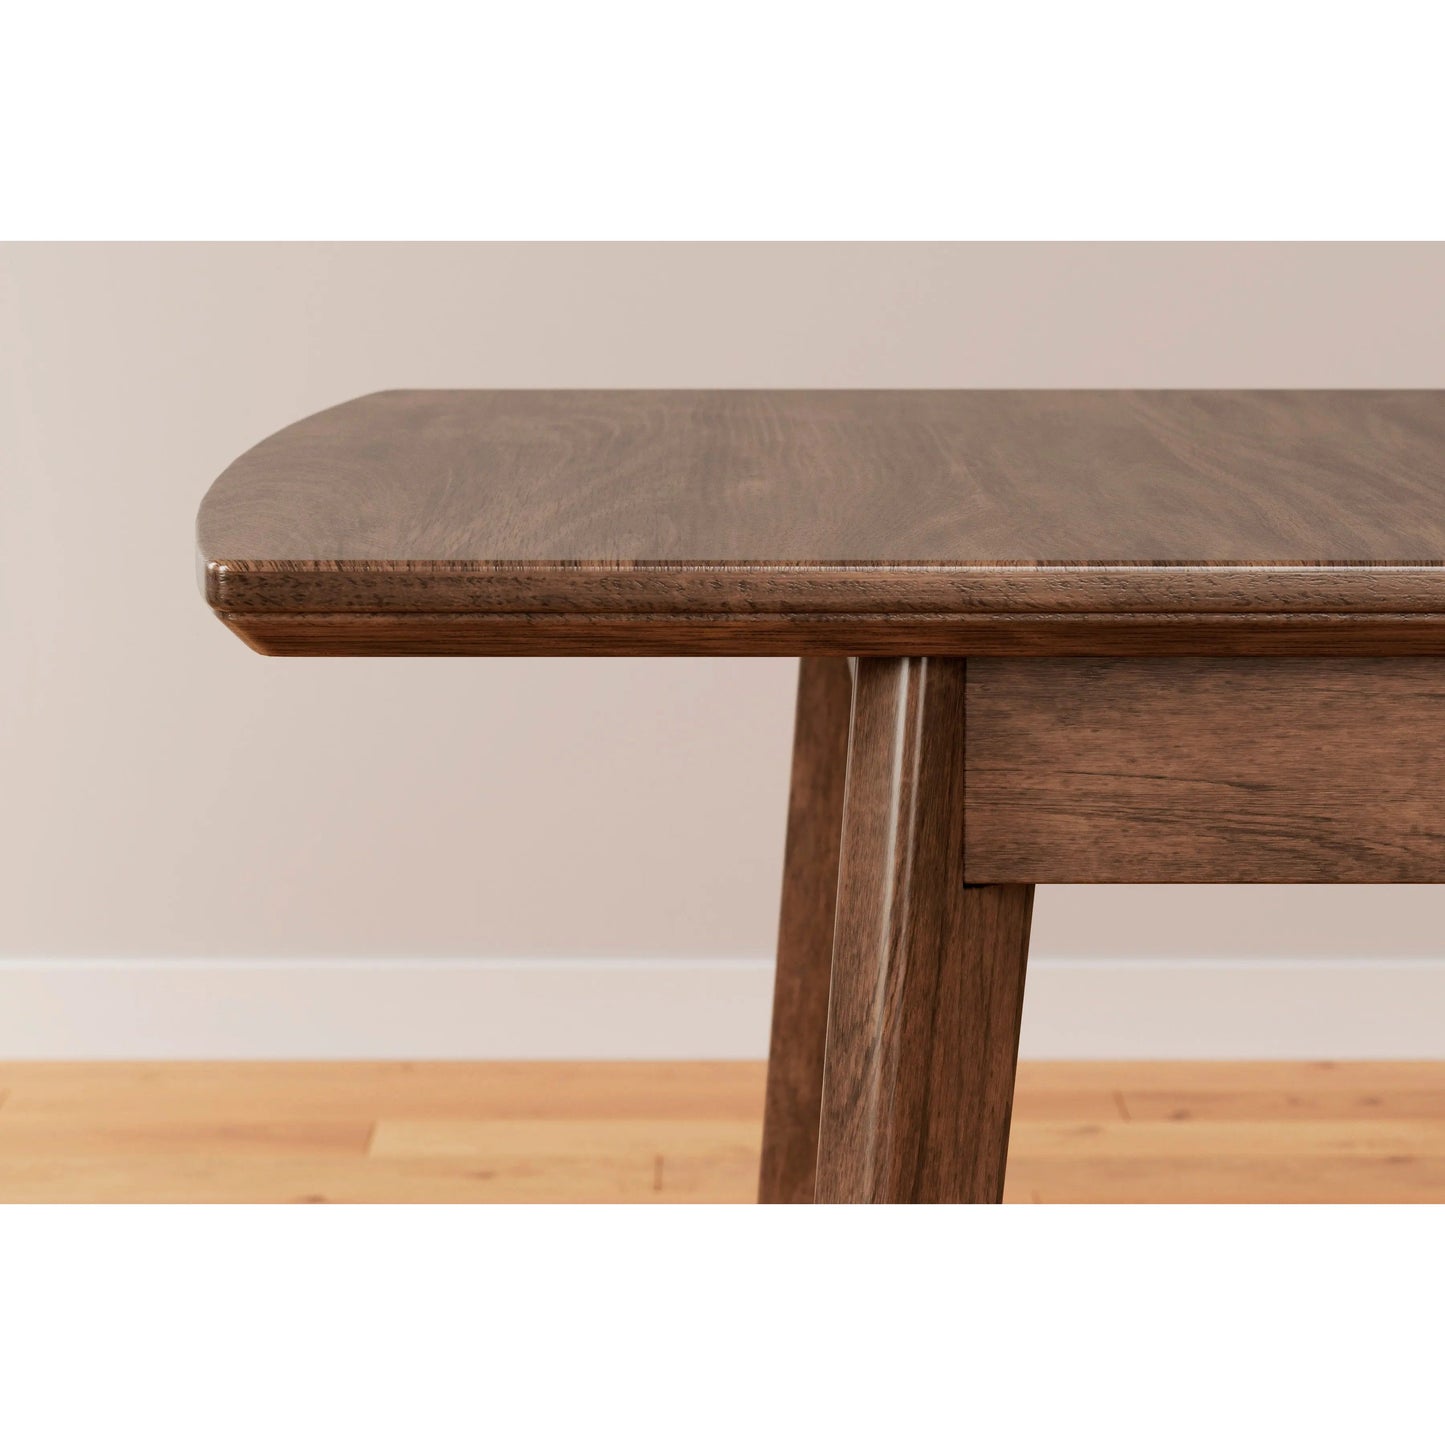 Lyncott - RECT DRM Butterfly EXT Table DINING TABLE